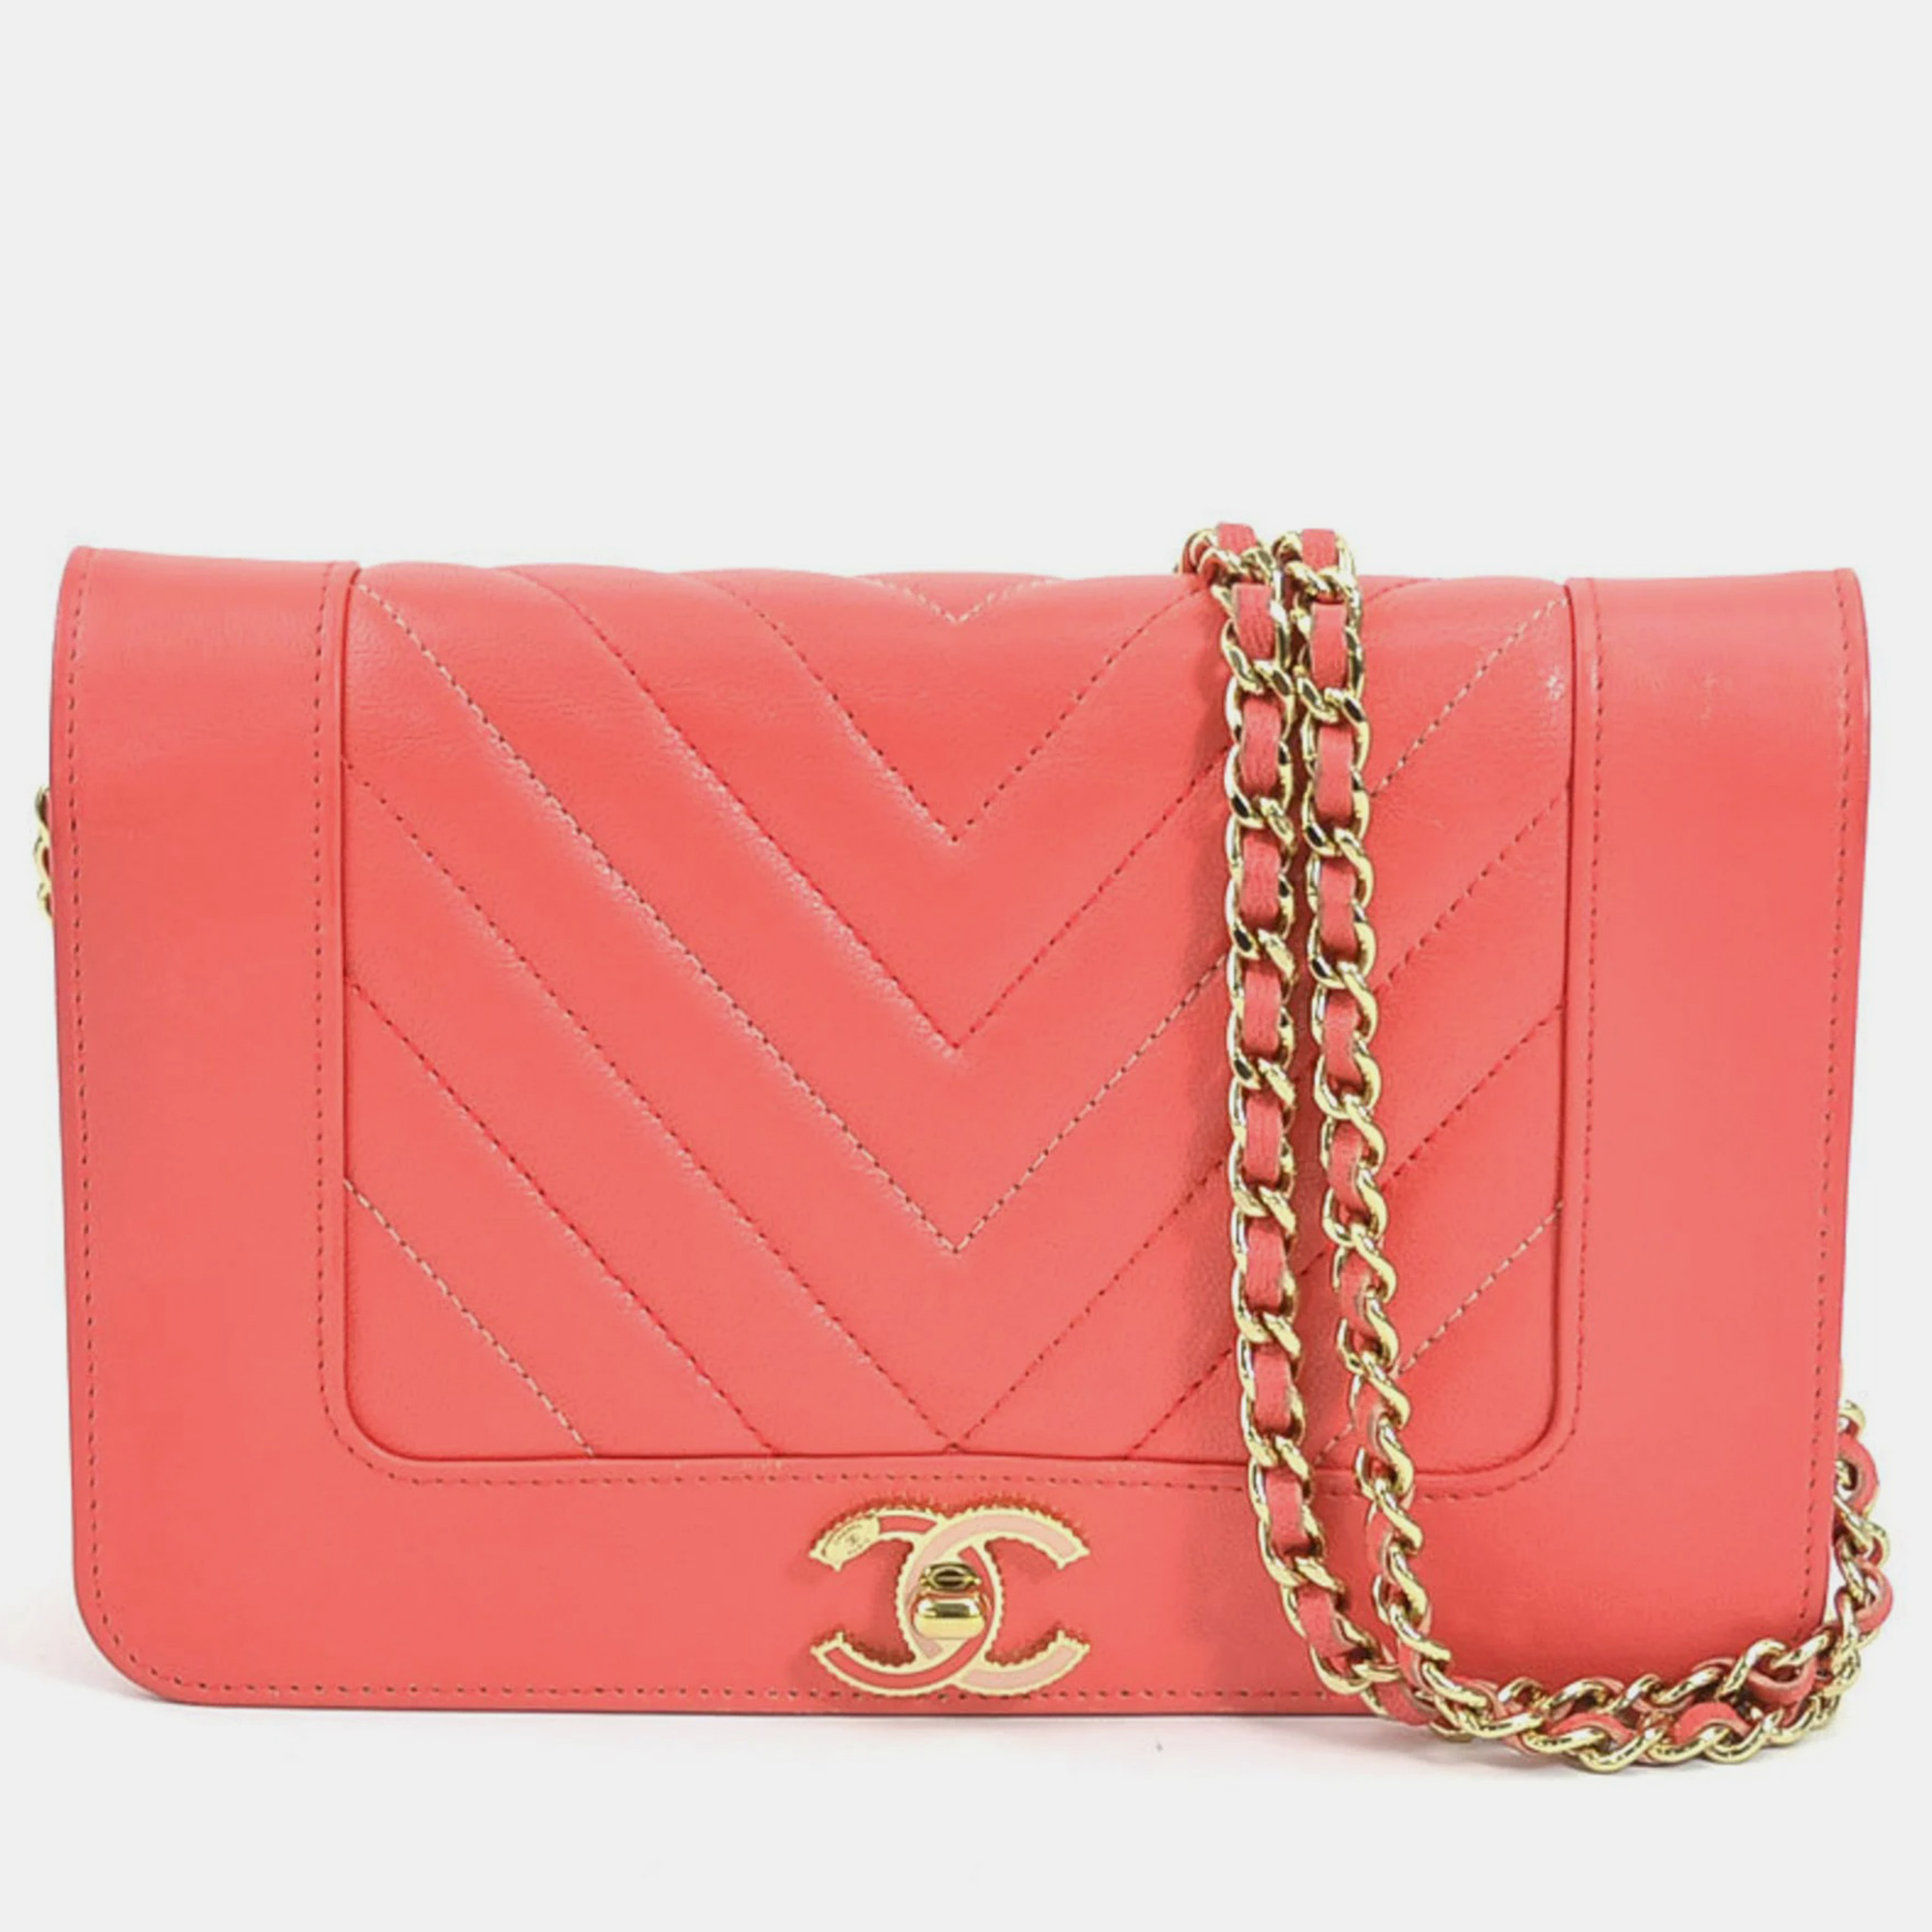 

CHANEL Coral Leather Mademoiselle Vintage Wallet On Chain, Pink